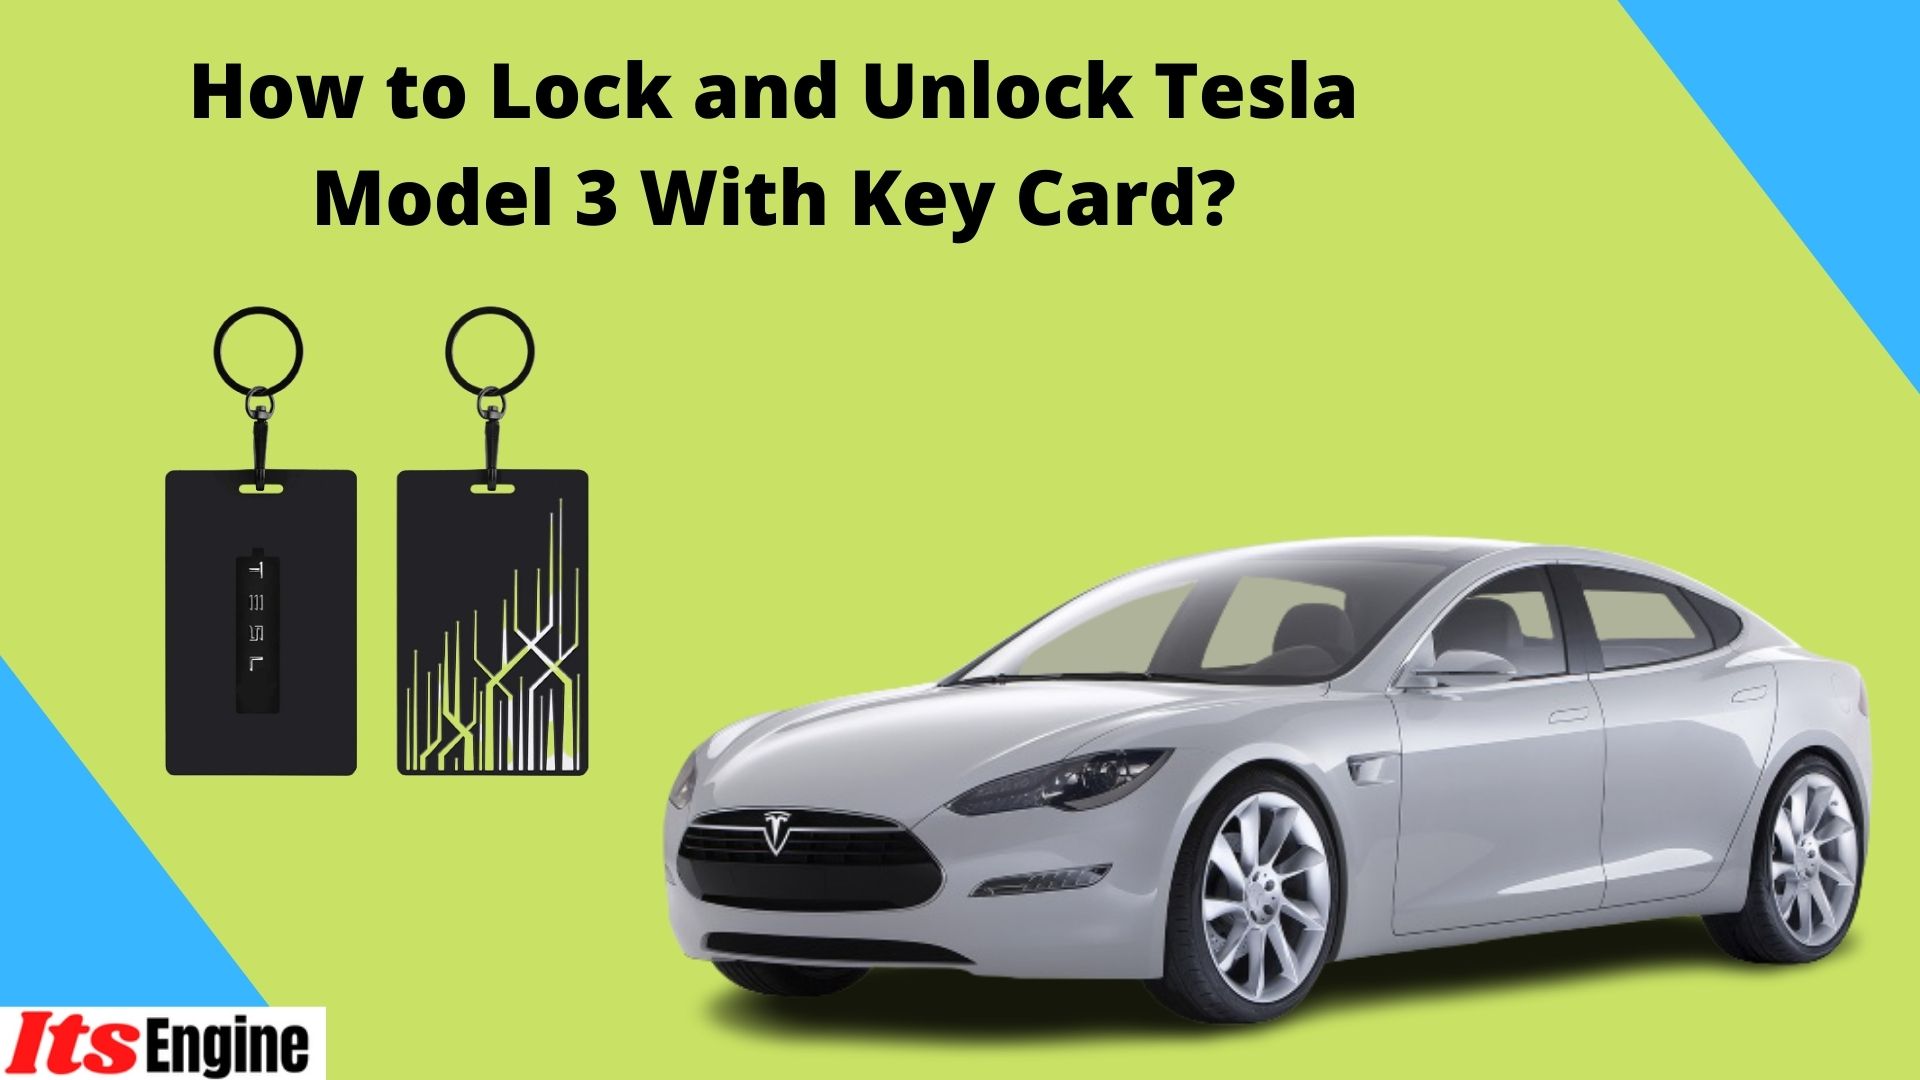 How to Lock and Unlock Tesla Model 3 with Key Card